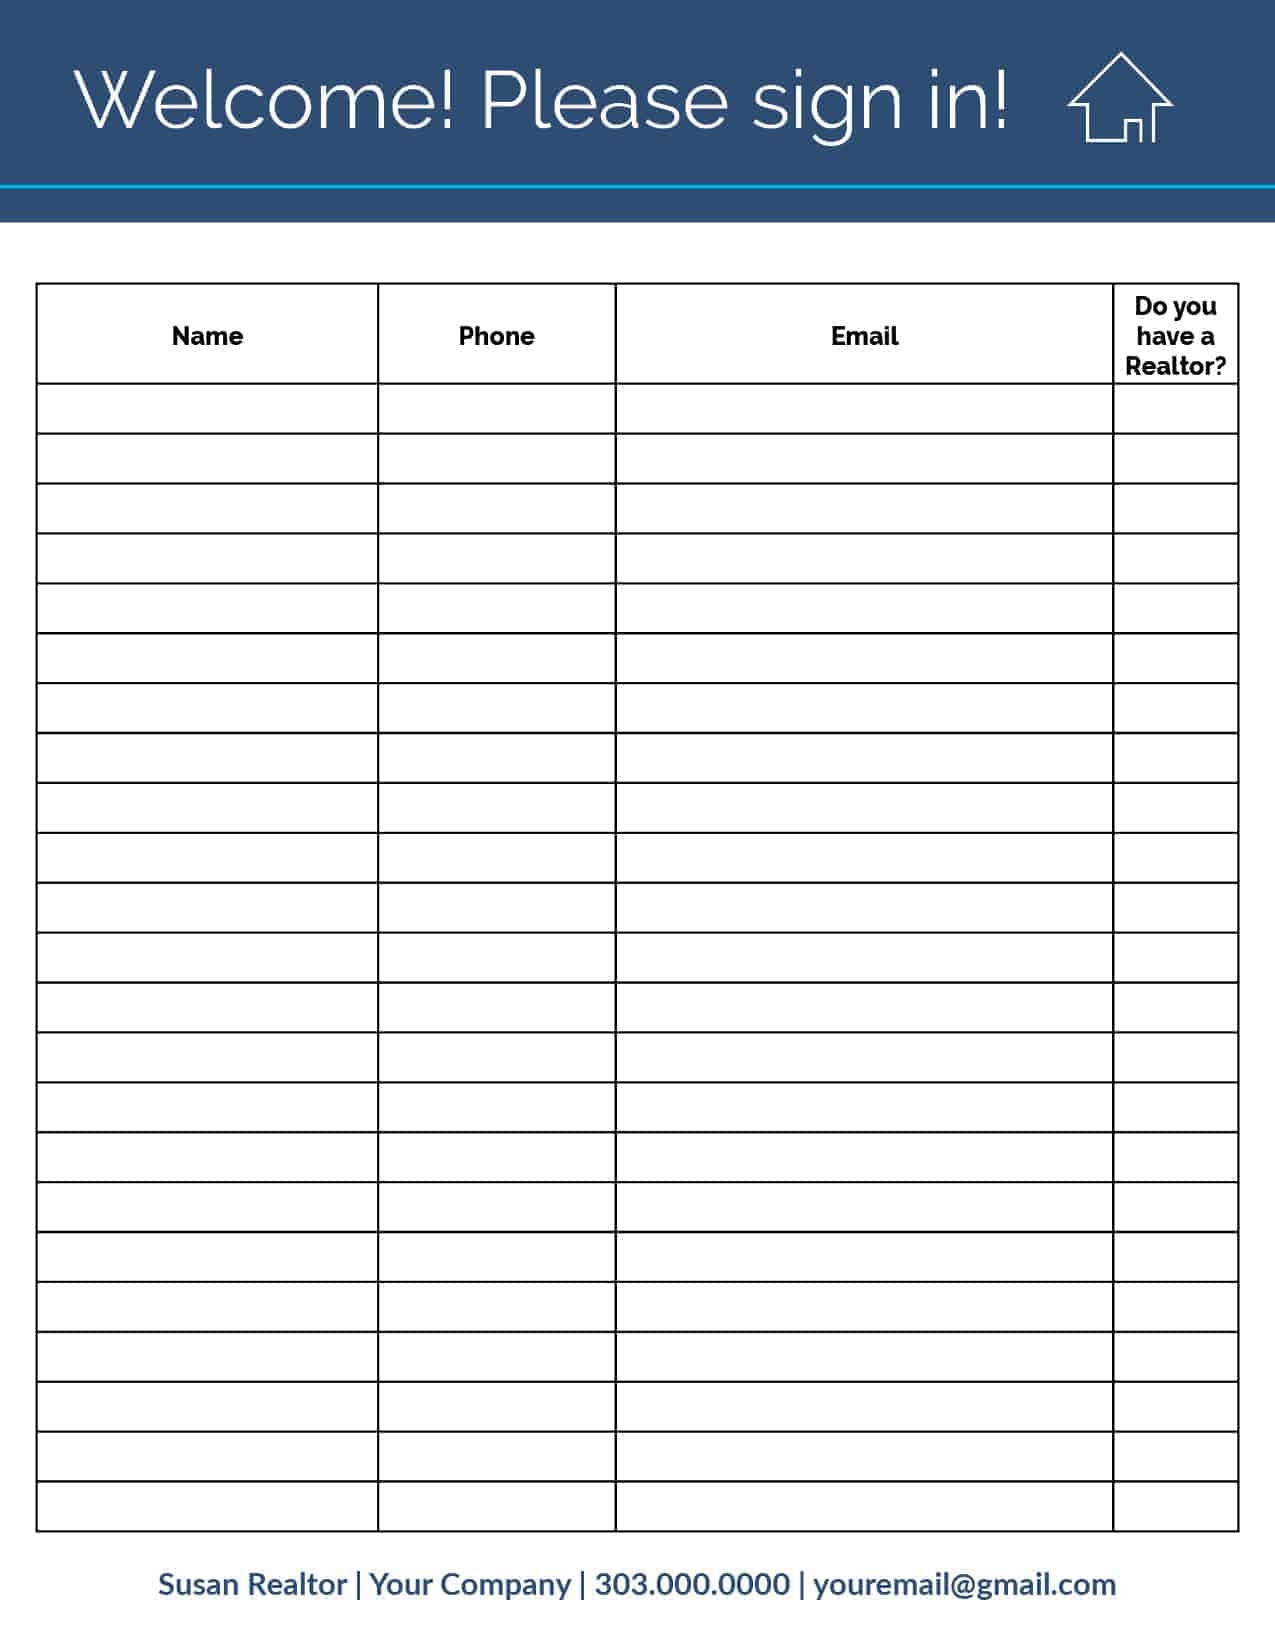 printable-open-house-sign-in-sheet-template-printable-templates